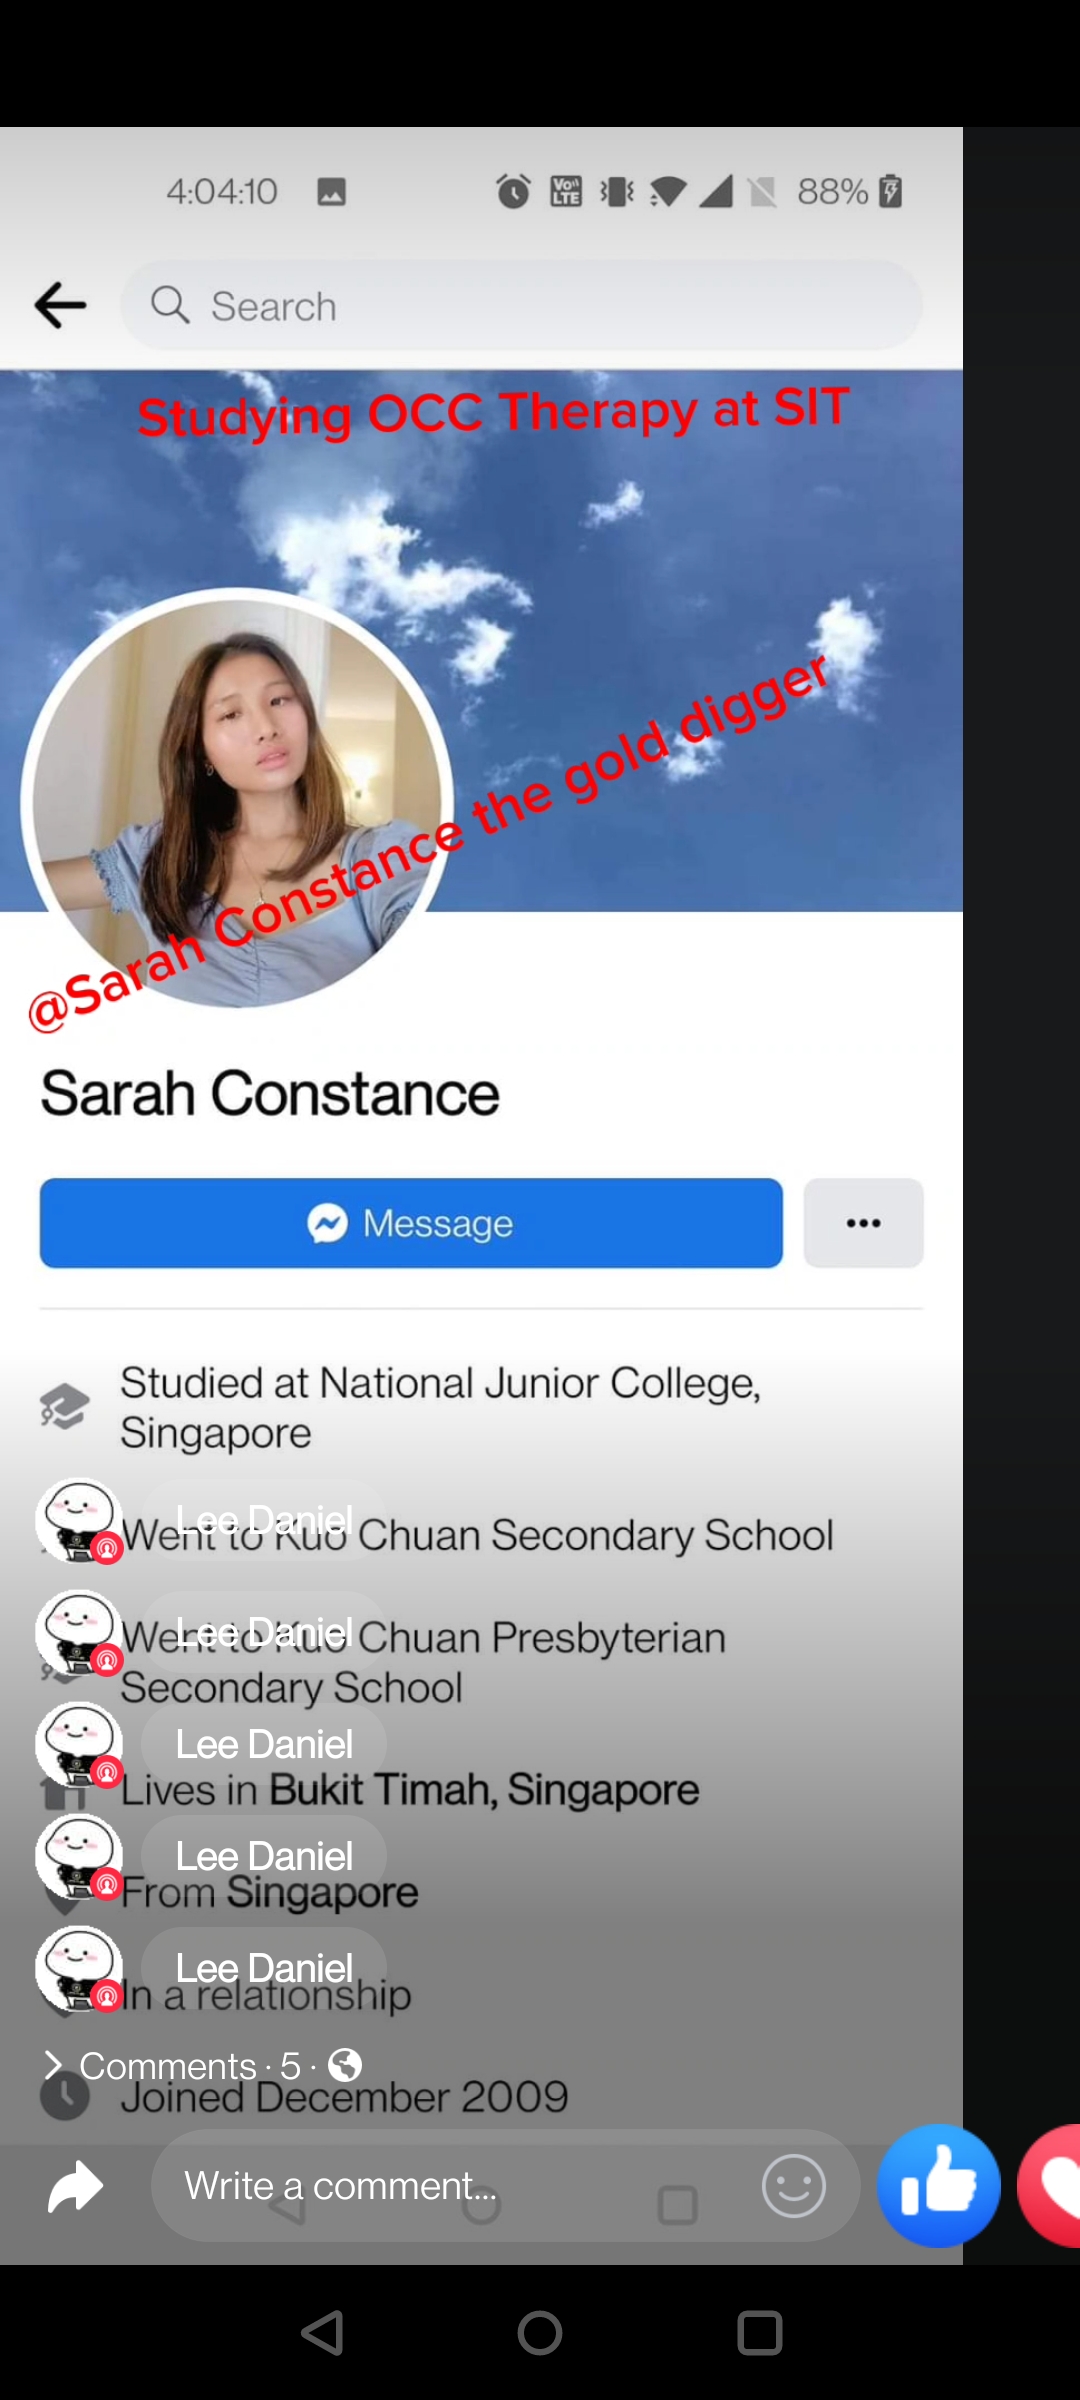 40410 Mm OB Ned 3%0

&— Q_ Search

 

Sarah Constance

Studied at National Junior College,
~ Singapore

>)
“wmyWeiti i Kuo Chuan Secondary School

Cn)
wre :¢ ¥ Lo Chuan Presbyterian
hy Secondary School

 

0 in Bukit Timah, Singapore
a

yr a;

) Lee Daniel
har)

> Comments-5- Q

PIR ICER ®) 1